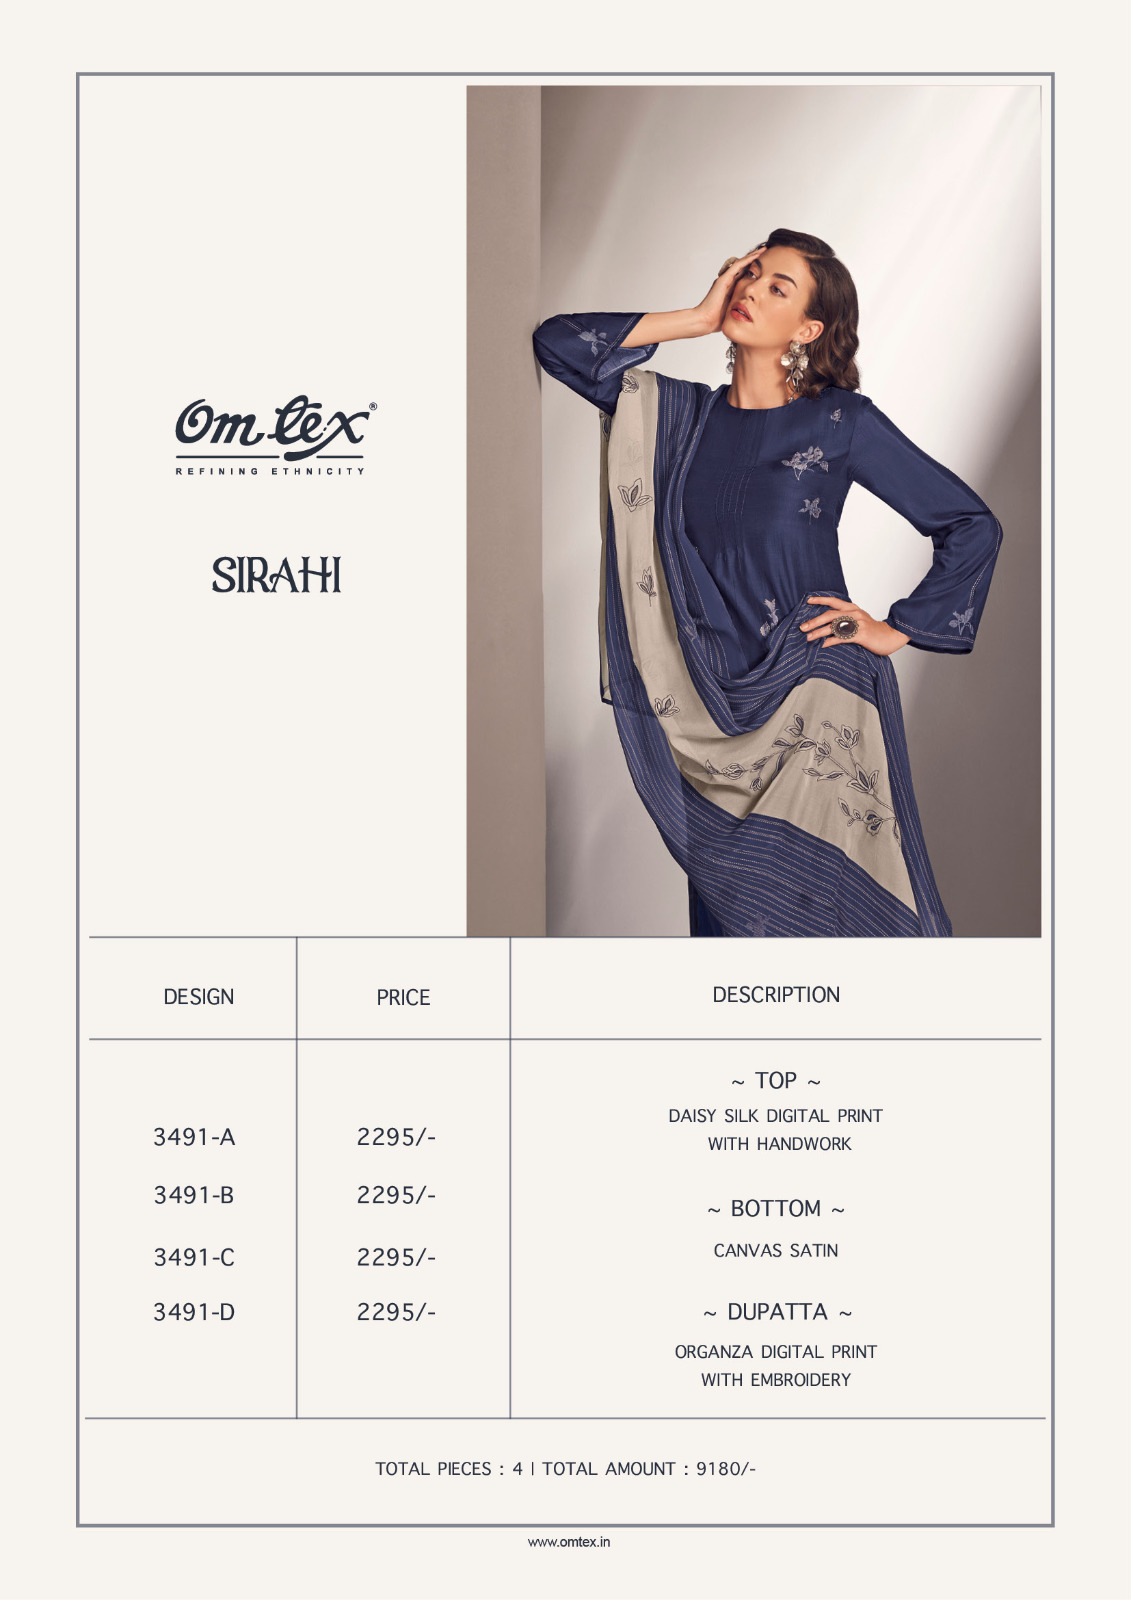 Omtex Sirathi collection 2